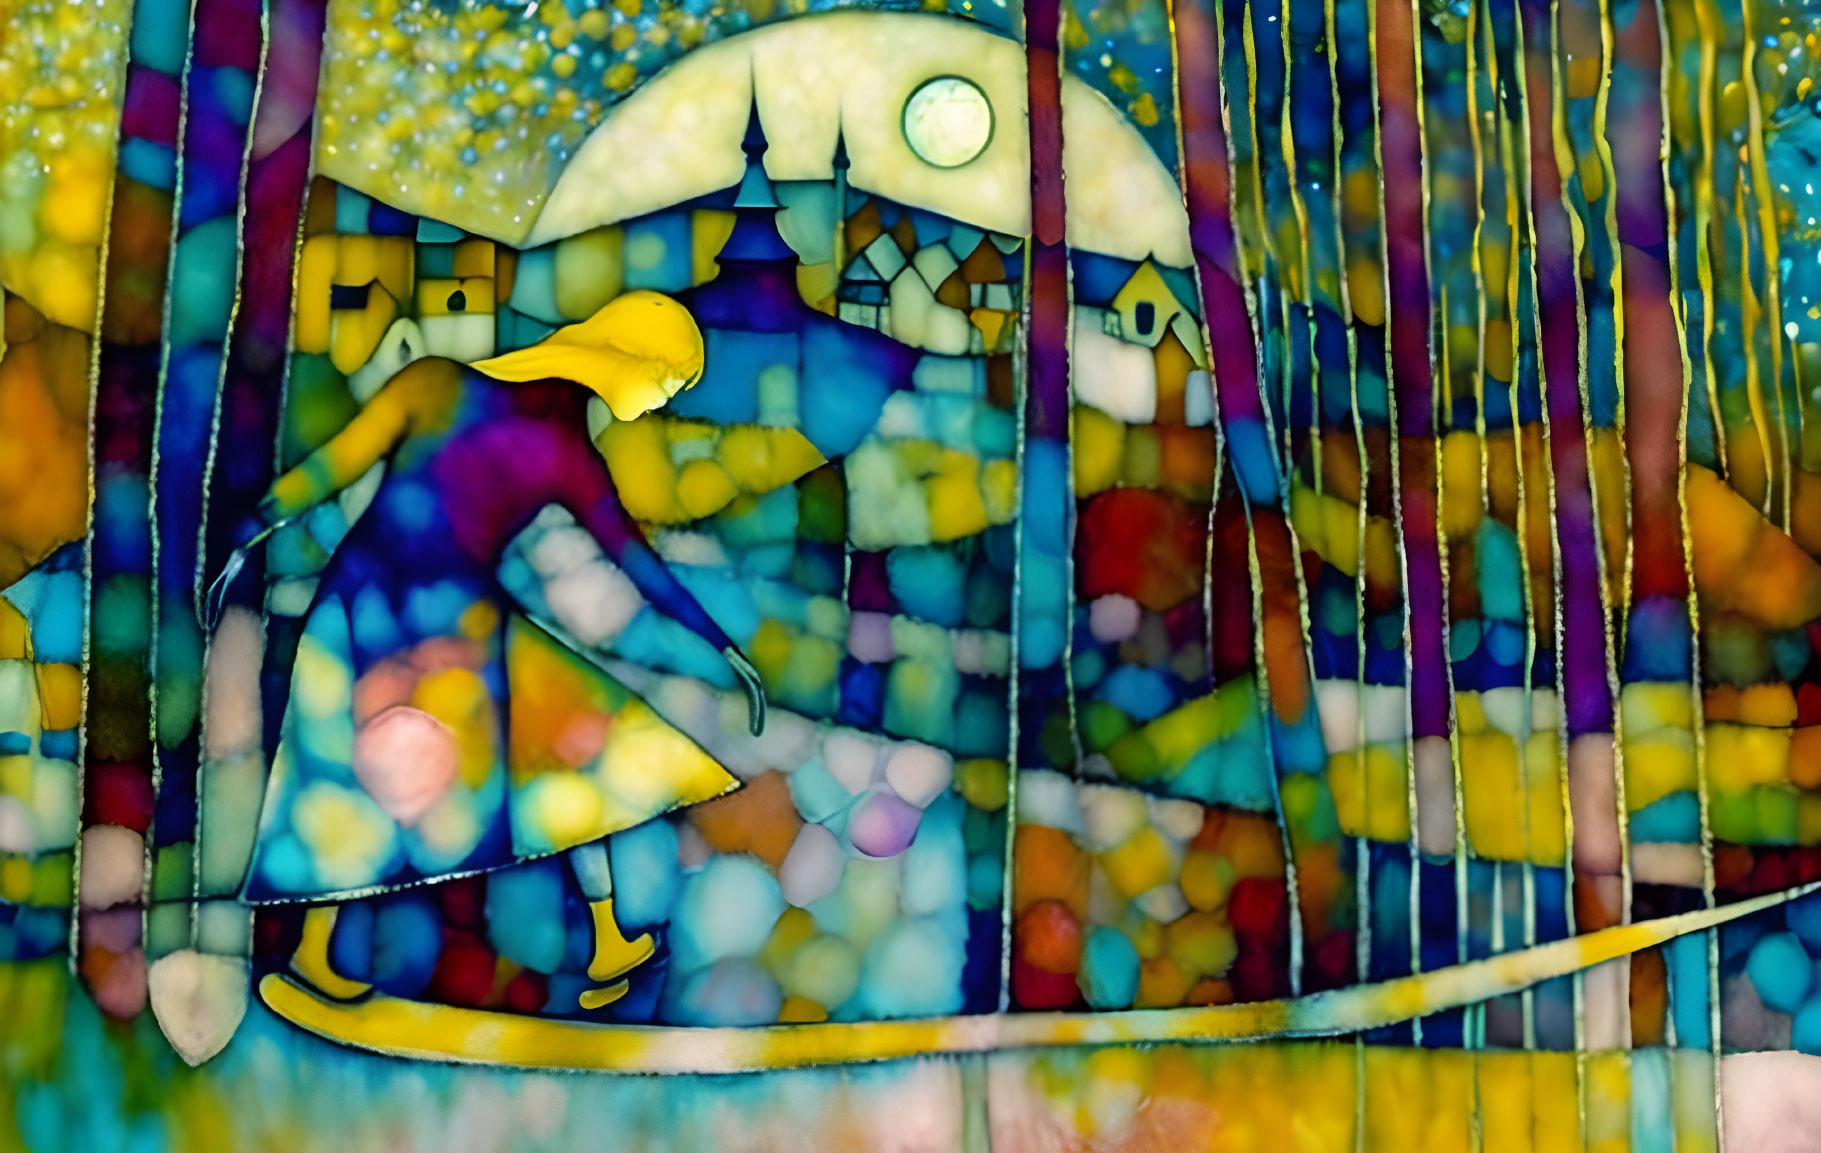 Vibrant stained glass style image of person skiing down colorful slope